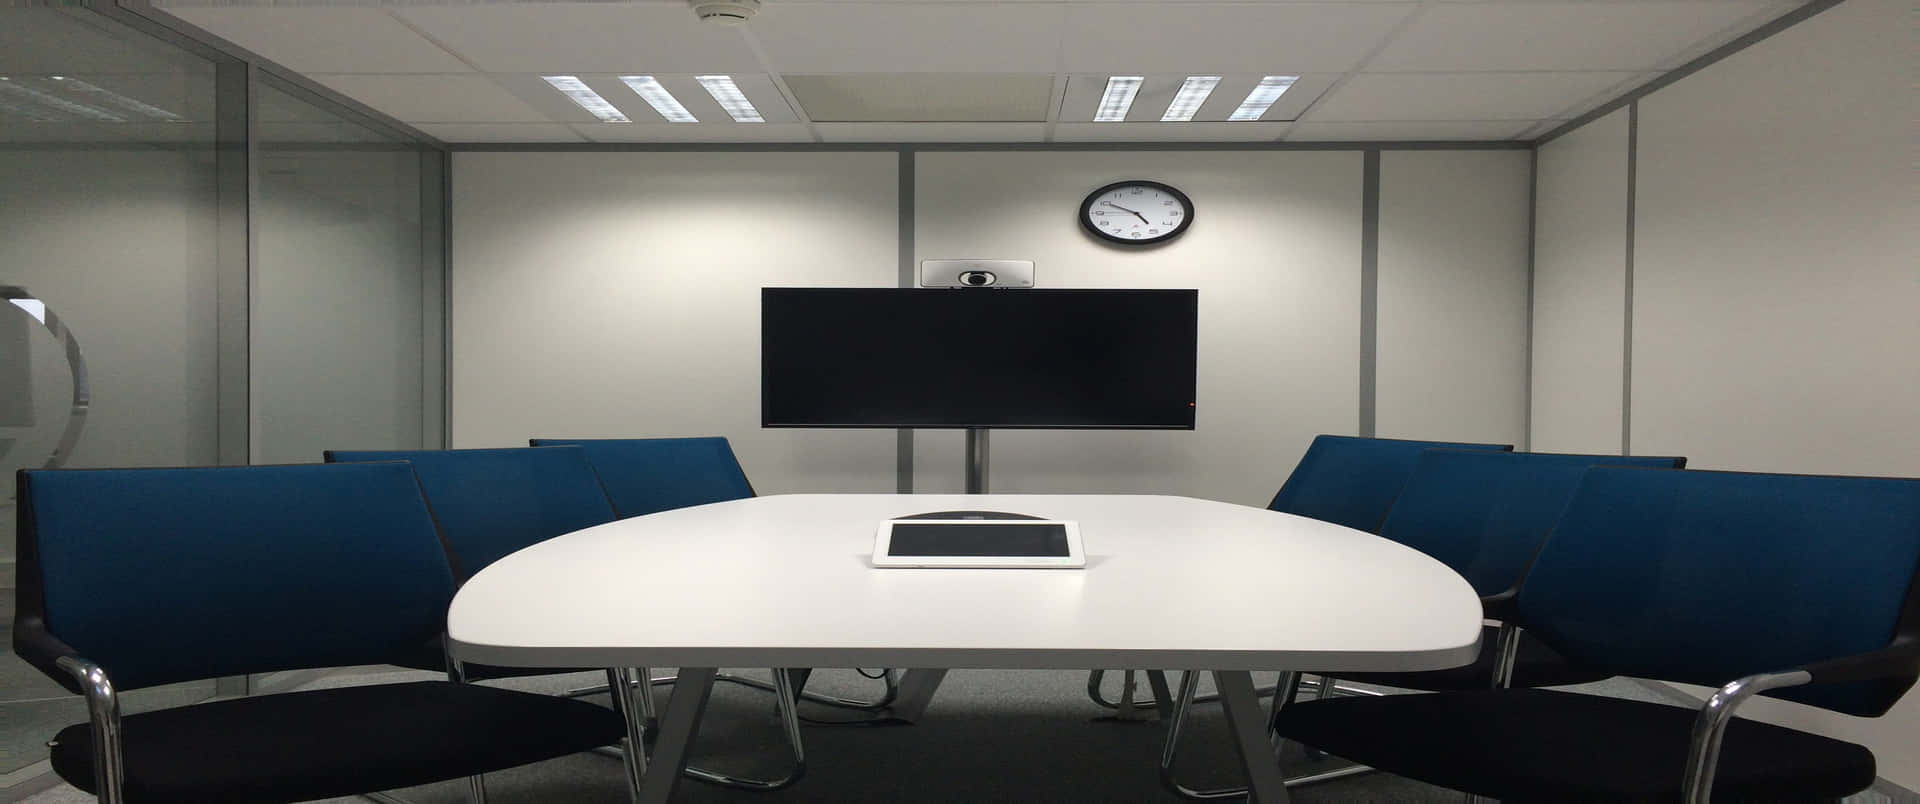 Virtual Conference Room 3440x1440p Office Background